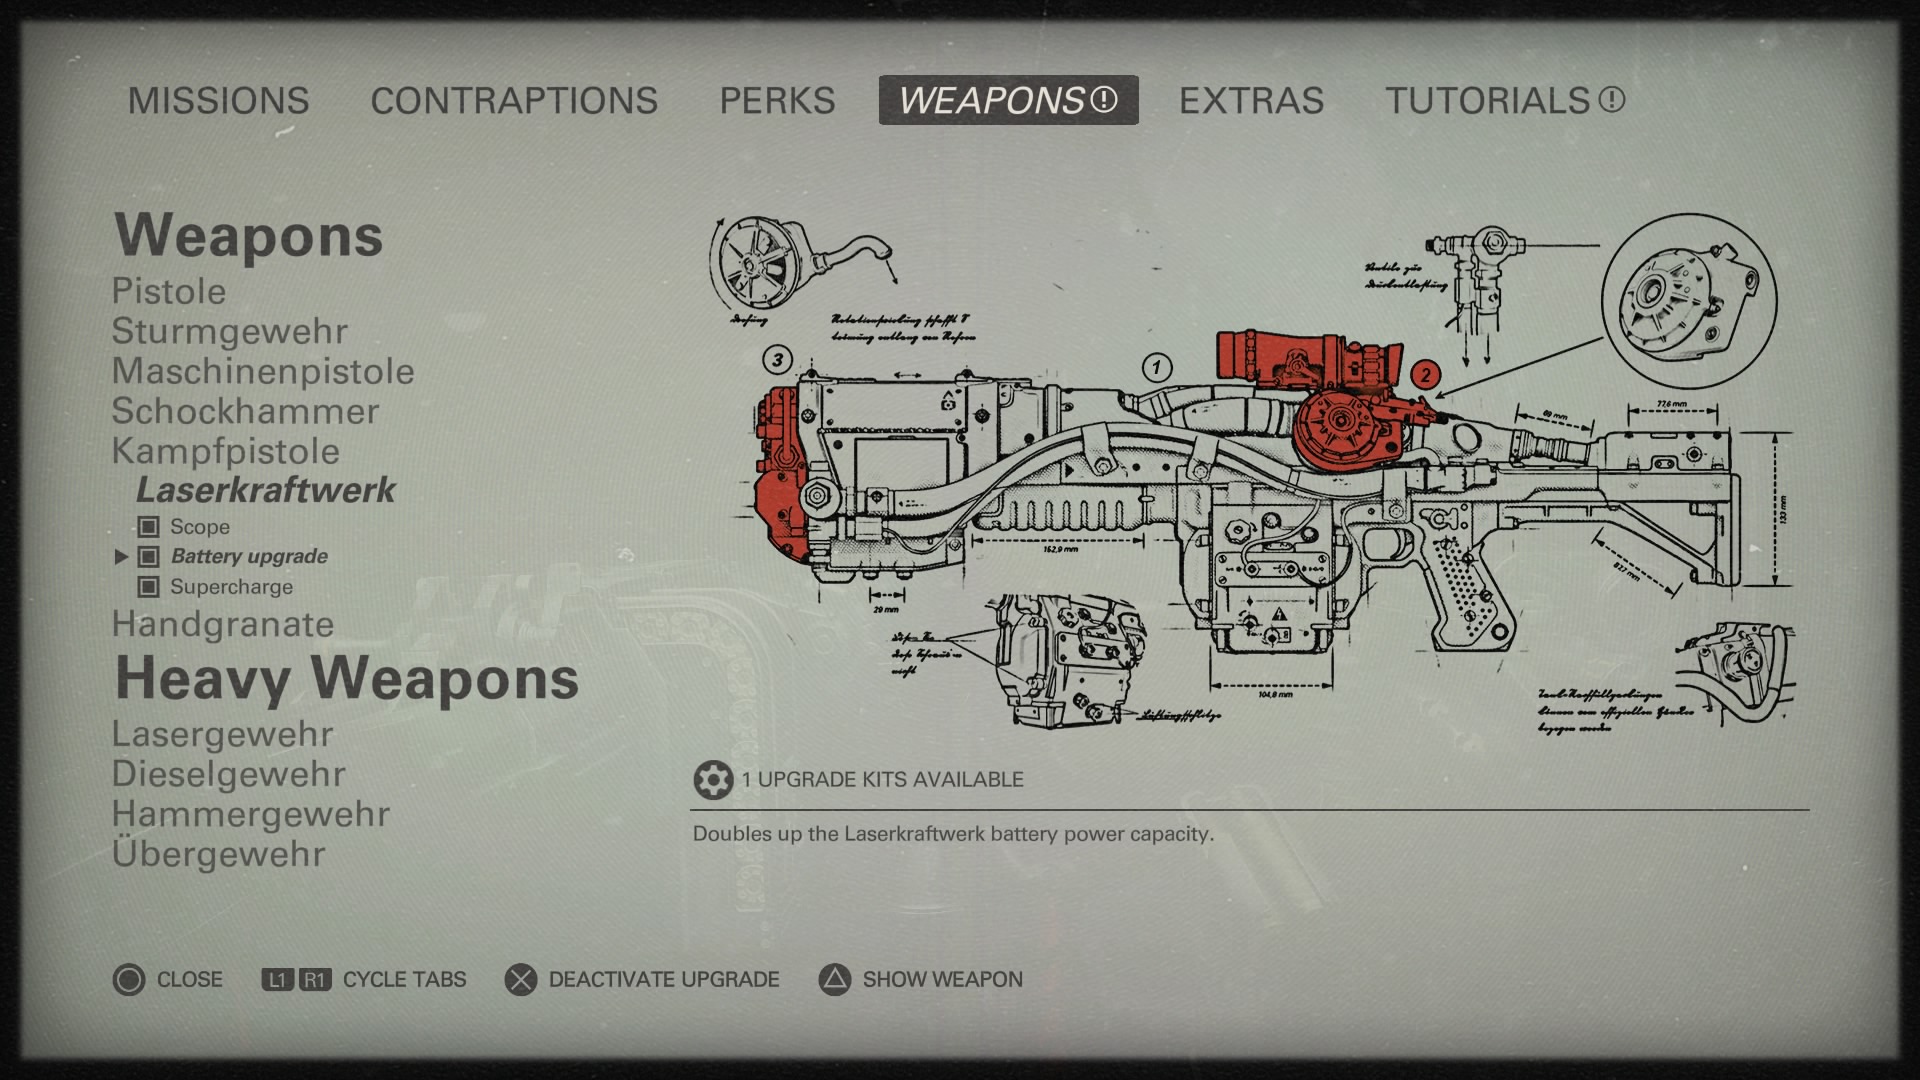 Wolfenstein The New Order - Complete Health And Armor Locations Guide 